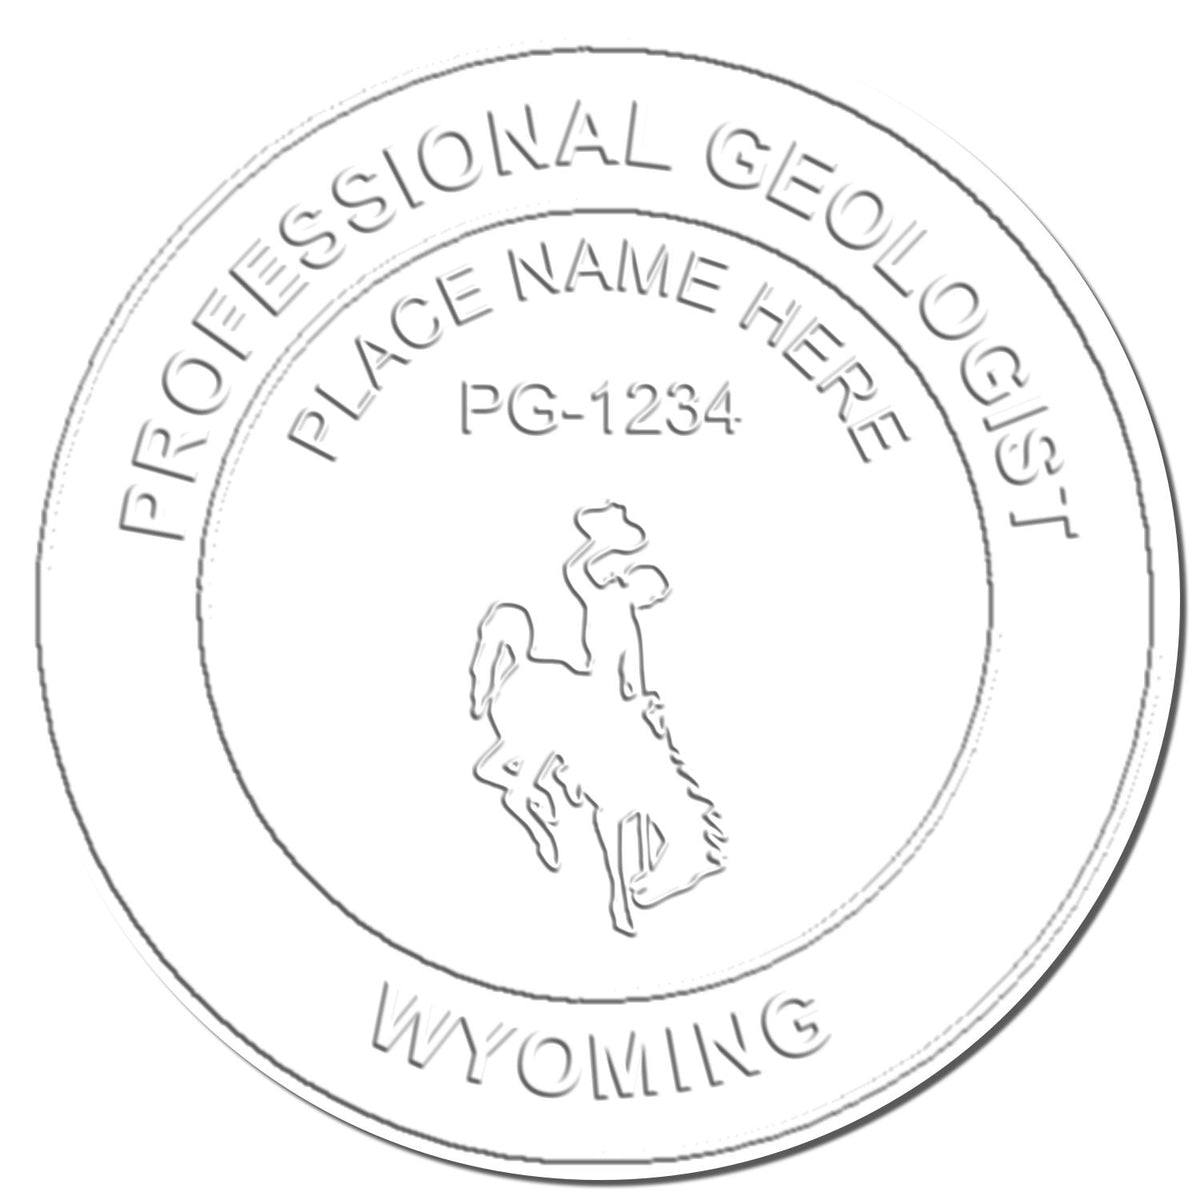 A stamped imprint of the Gift Wyoming Geologist Seal in this stylish lifestyle photo, setting the tone for a unique and personalized product.